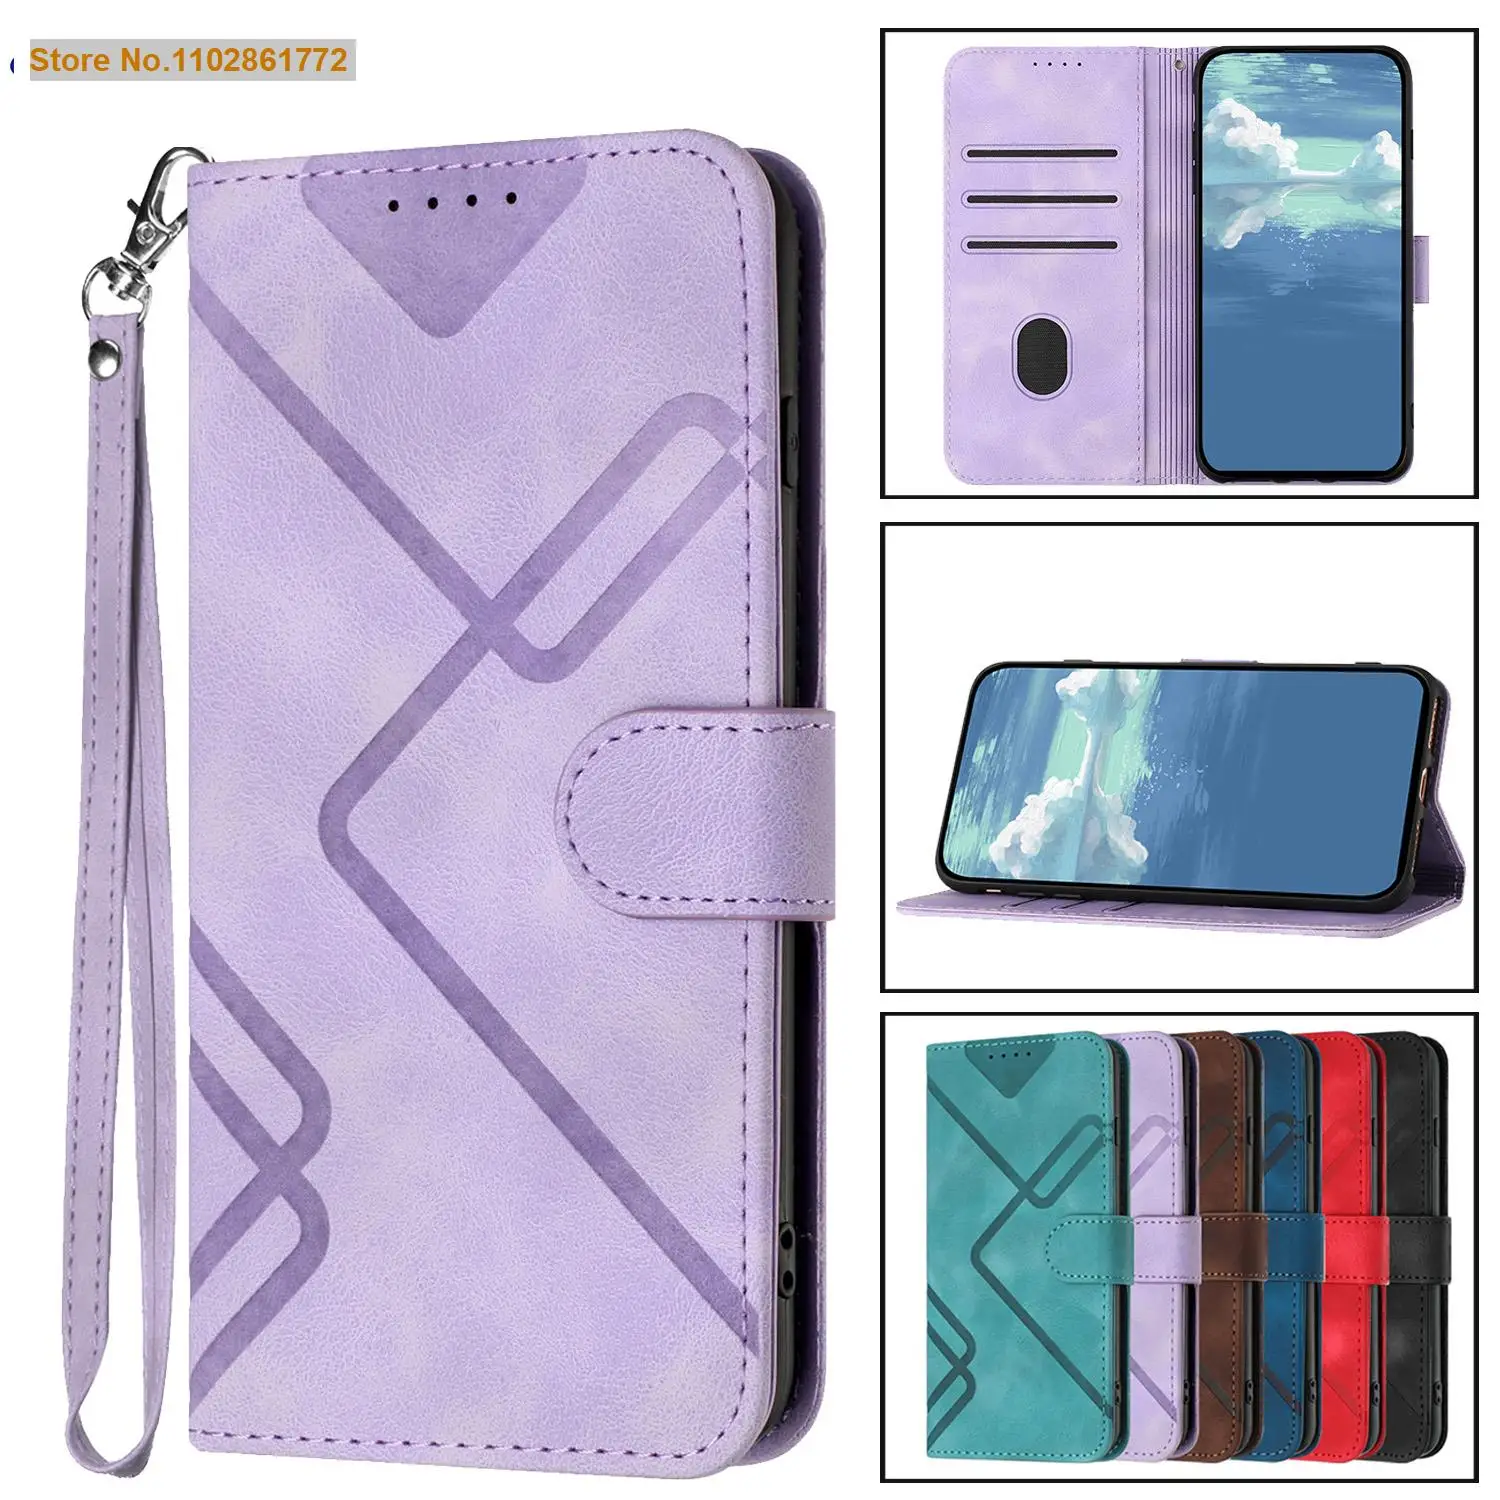 

Leather Flip Phone Case For Samsung Galaxy A71 A51 A41 A31 A21S A11 A01 A70 A50 A30 S A40 A20 A10 Wallet Card Slots Stand Cover